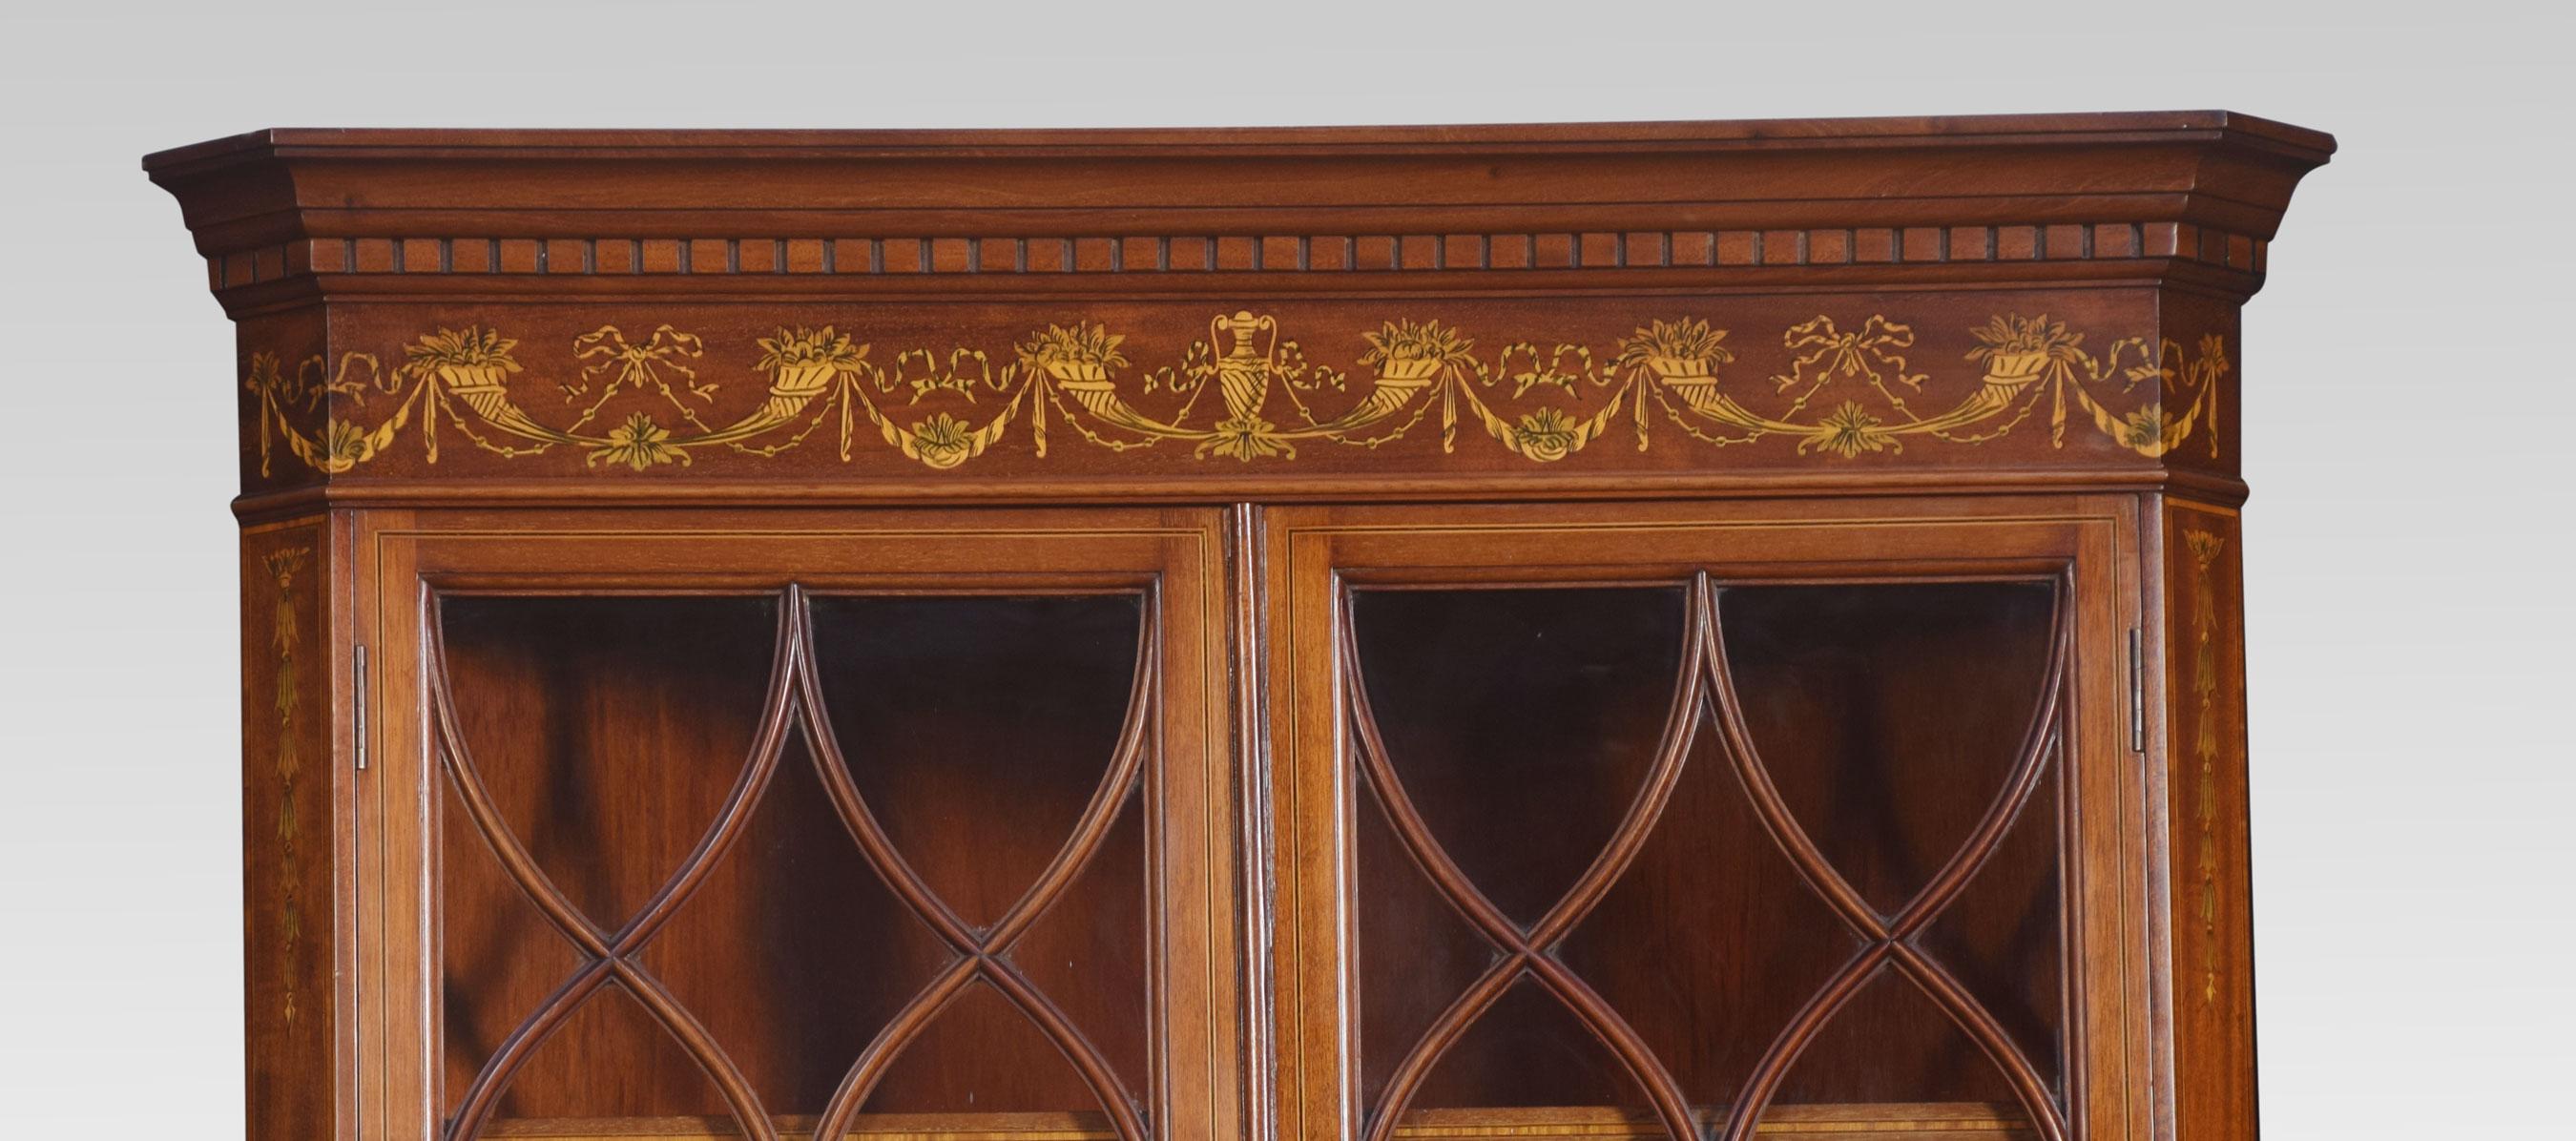 Mahogany, satinwood, and marquetry inlaid corner cabinet, the molded cornice above two glazed doors enclosing two fixed shelves. The lower section with conforming frieze and two cupboard doors elaborately decorated with marquetry panels having